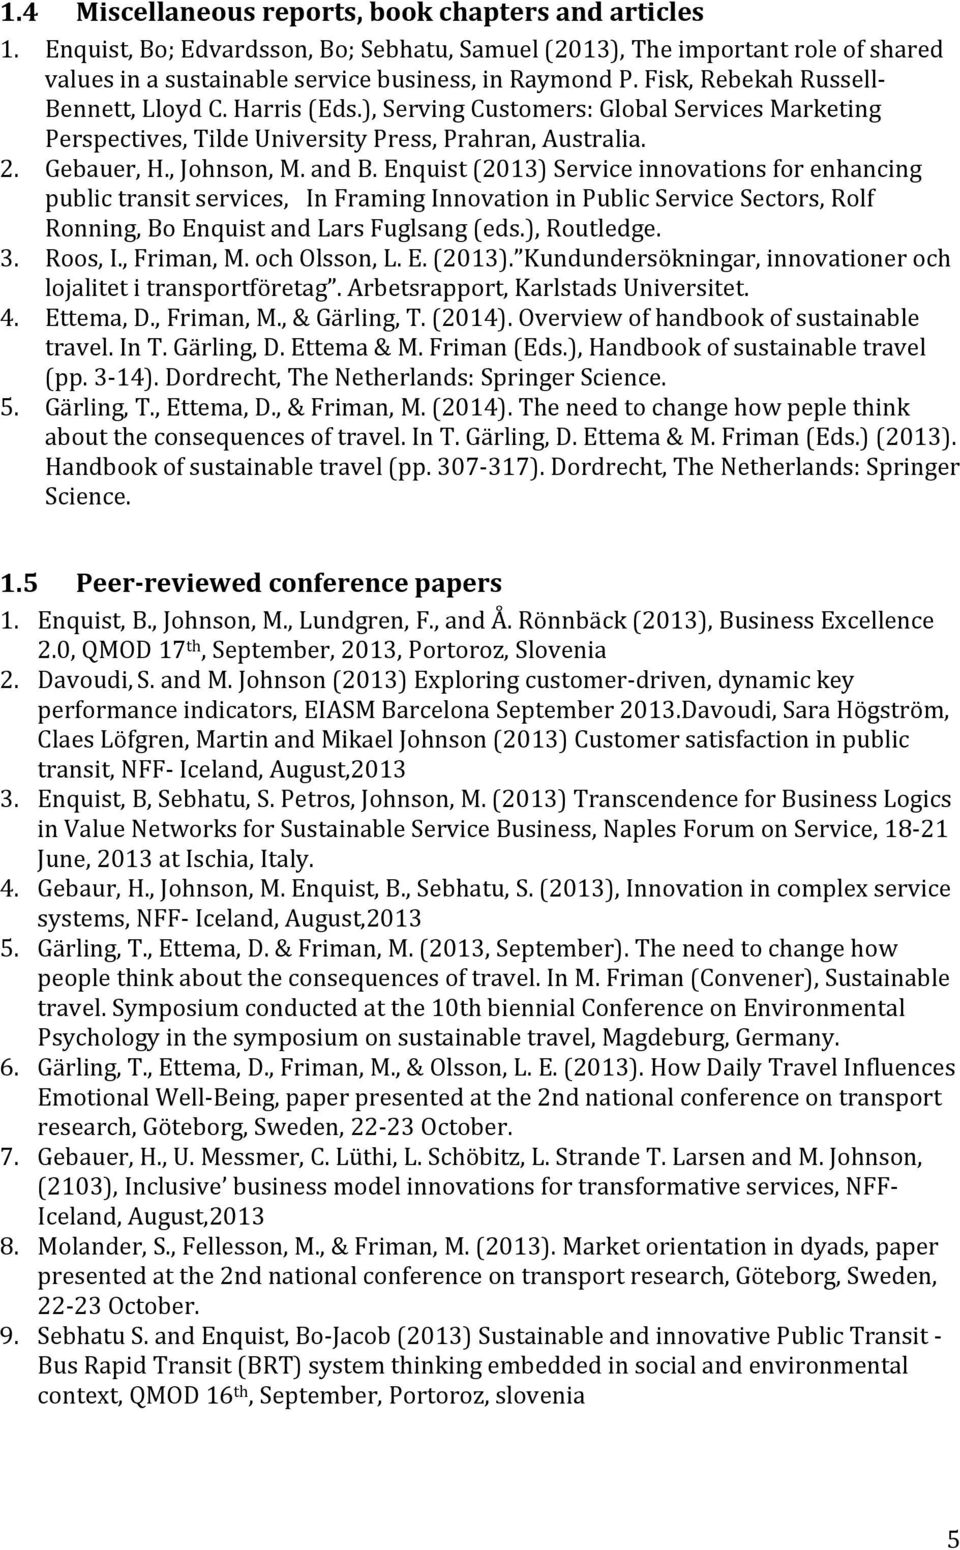 Enquist (2013) Service innovations for enhancing public transit services, In Framing Innovation in Public Service Sectors, Rolf Ronning, Bo Enquist and Lars Fuglsang (eds.), Routledge. 3. Roos, I.